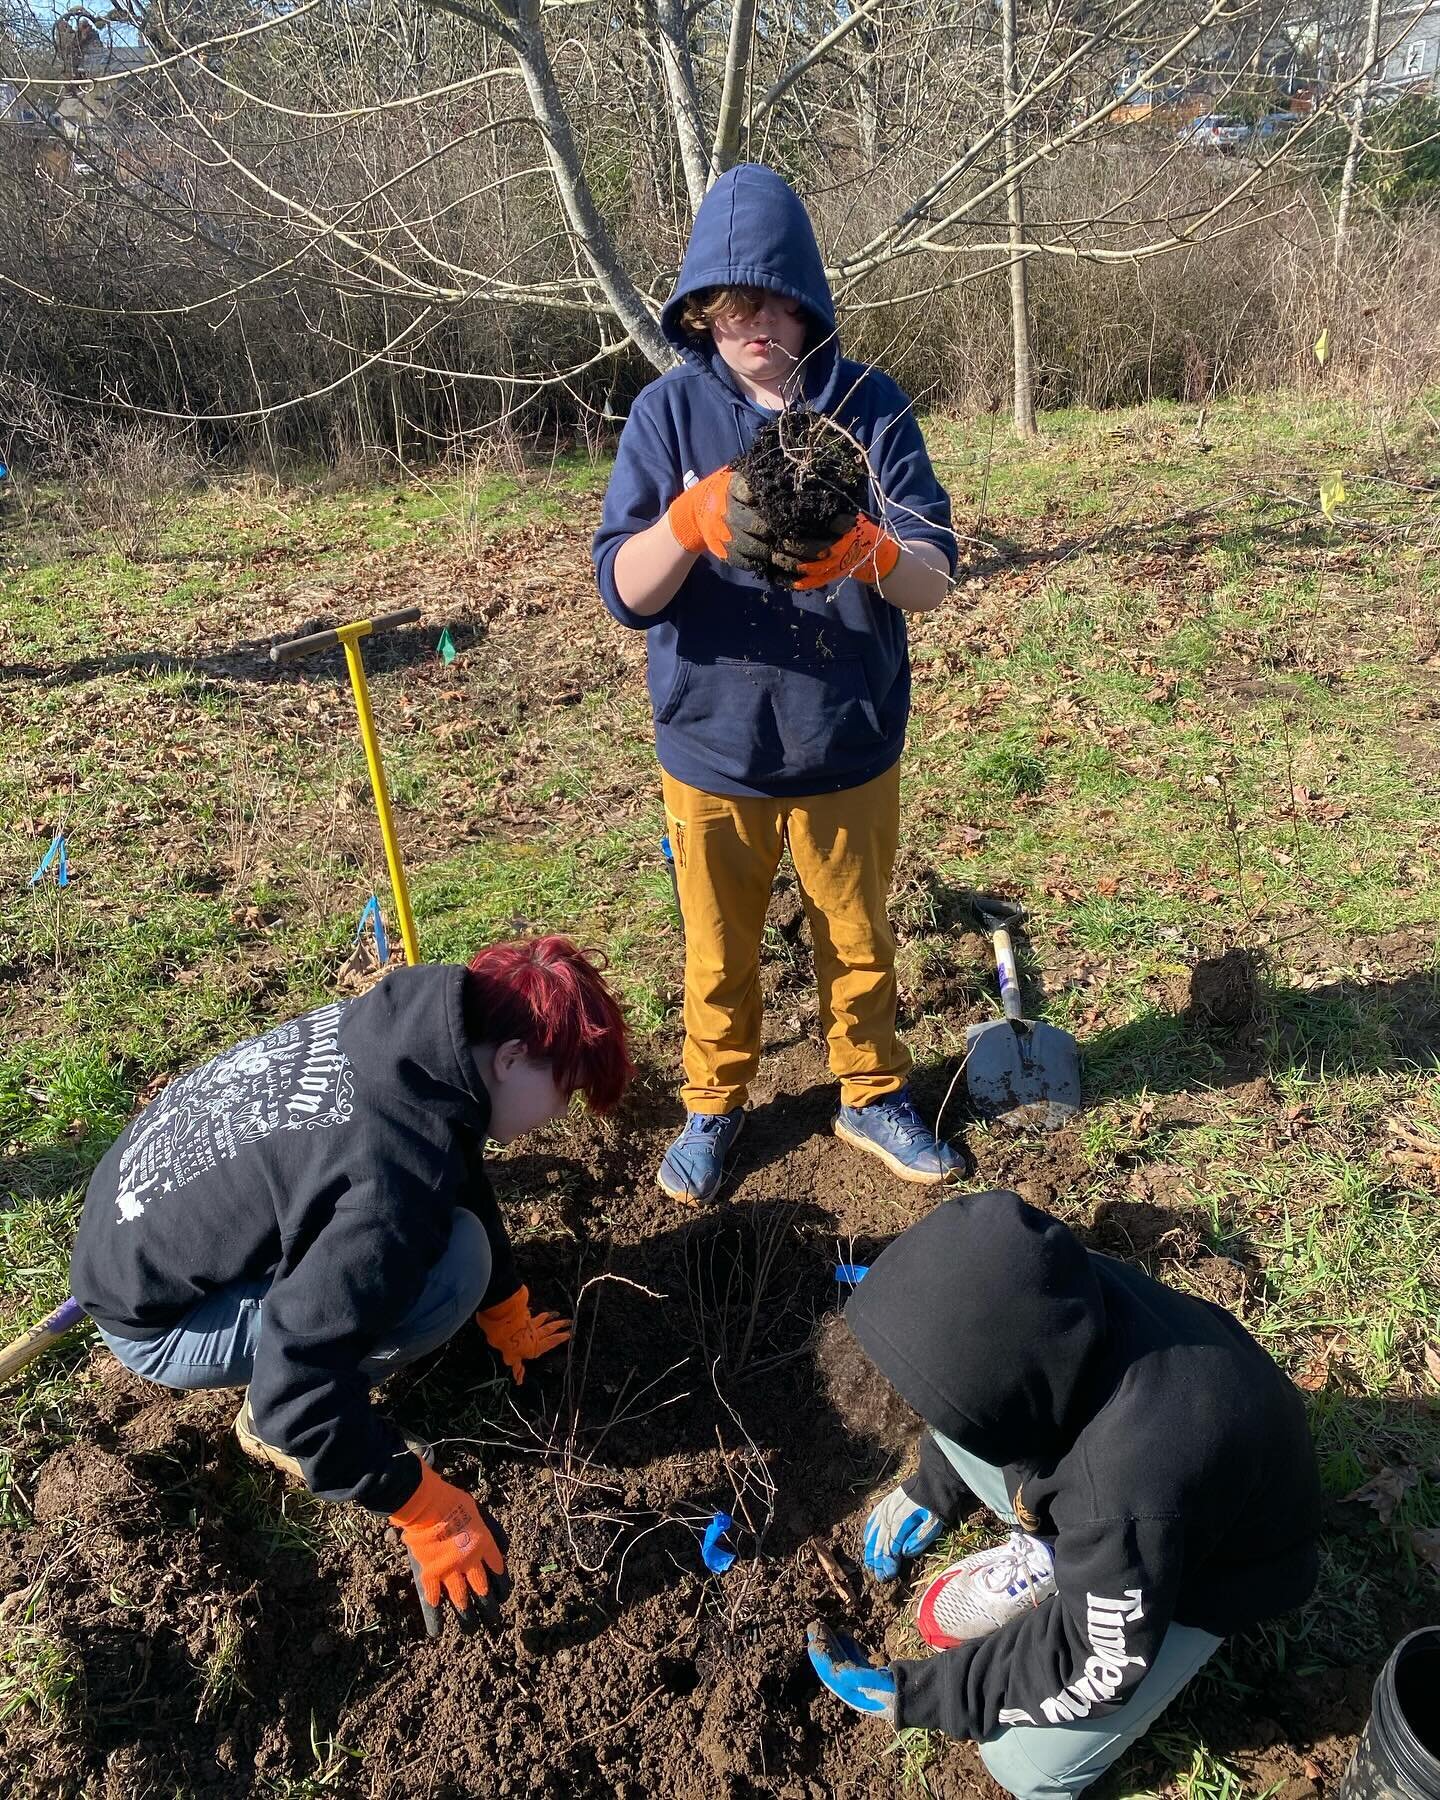 In Portland Forest School, we connect our students through earth skills, academic excellence, and conservation. Last week,our middle schoolers partnered with Portland Parks and Rec to plant native trees and shrubs, helping to restore the riparian are